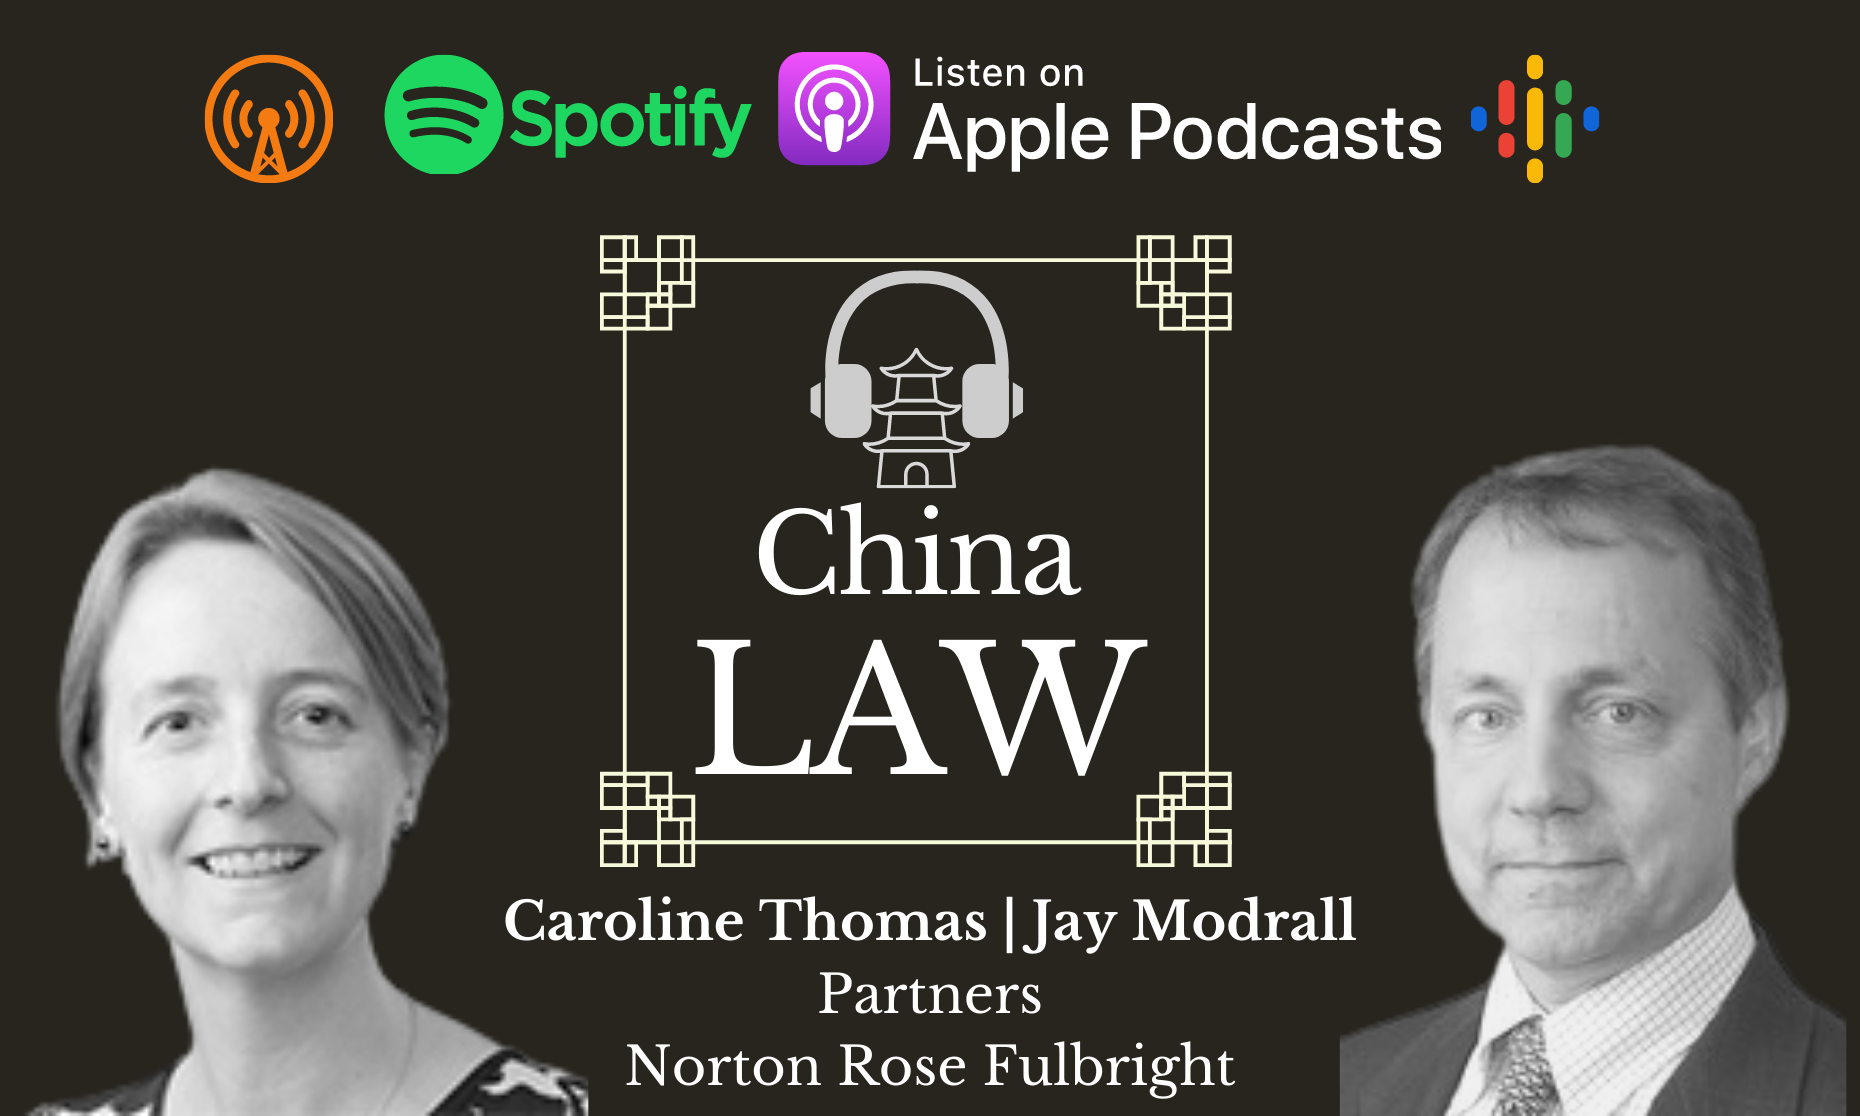 Podcast #16: Turning Tides - EU Foreign Investment Screening, COVID-19, and Growing Scrutiny on China